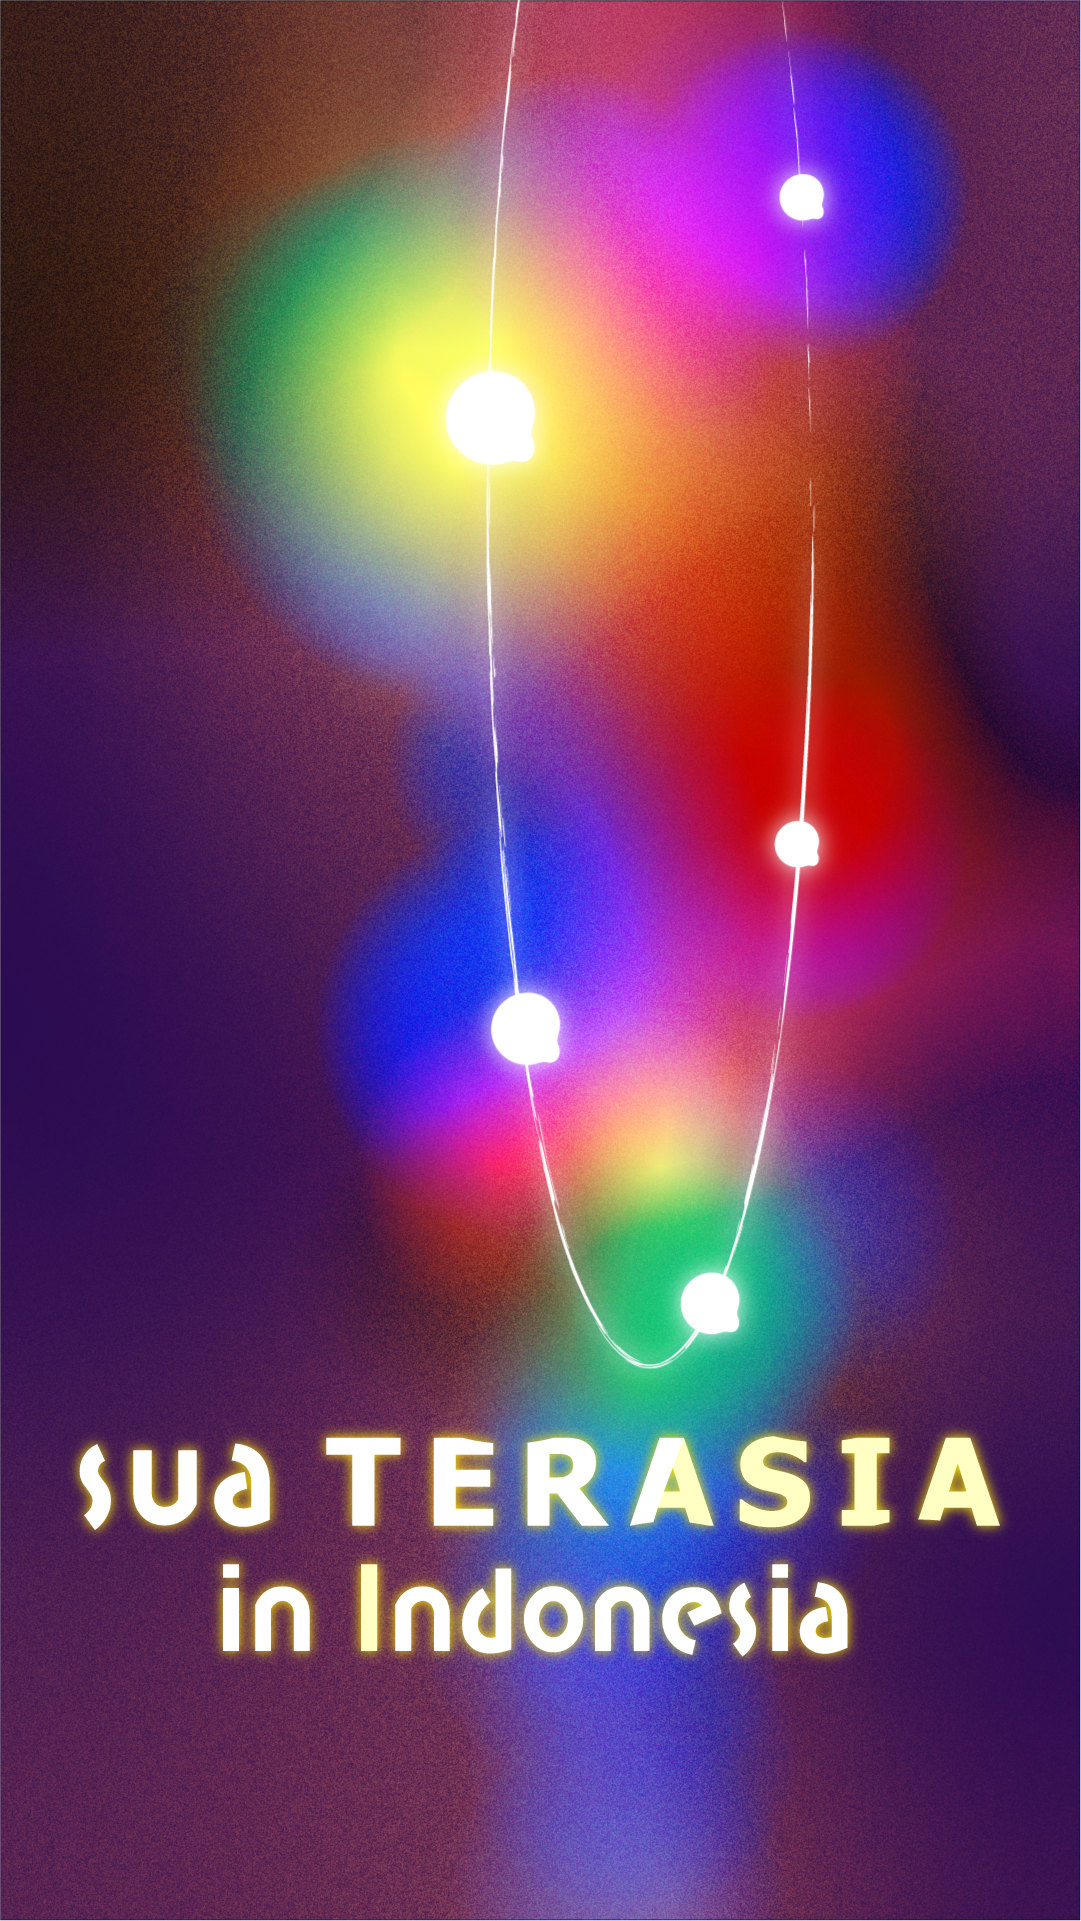 Transnational art festival “Sua TERASIA” to be held in 2024